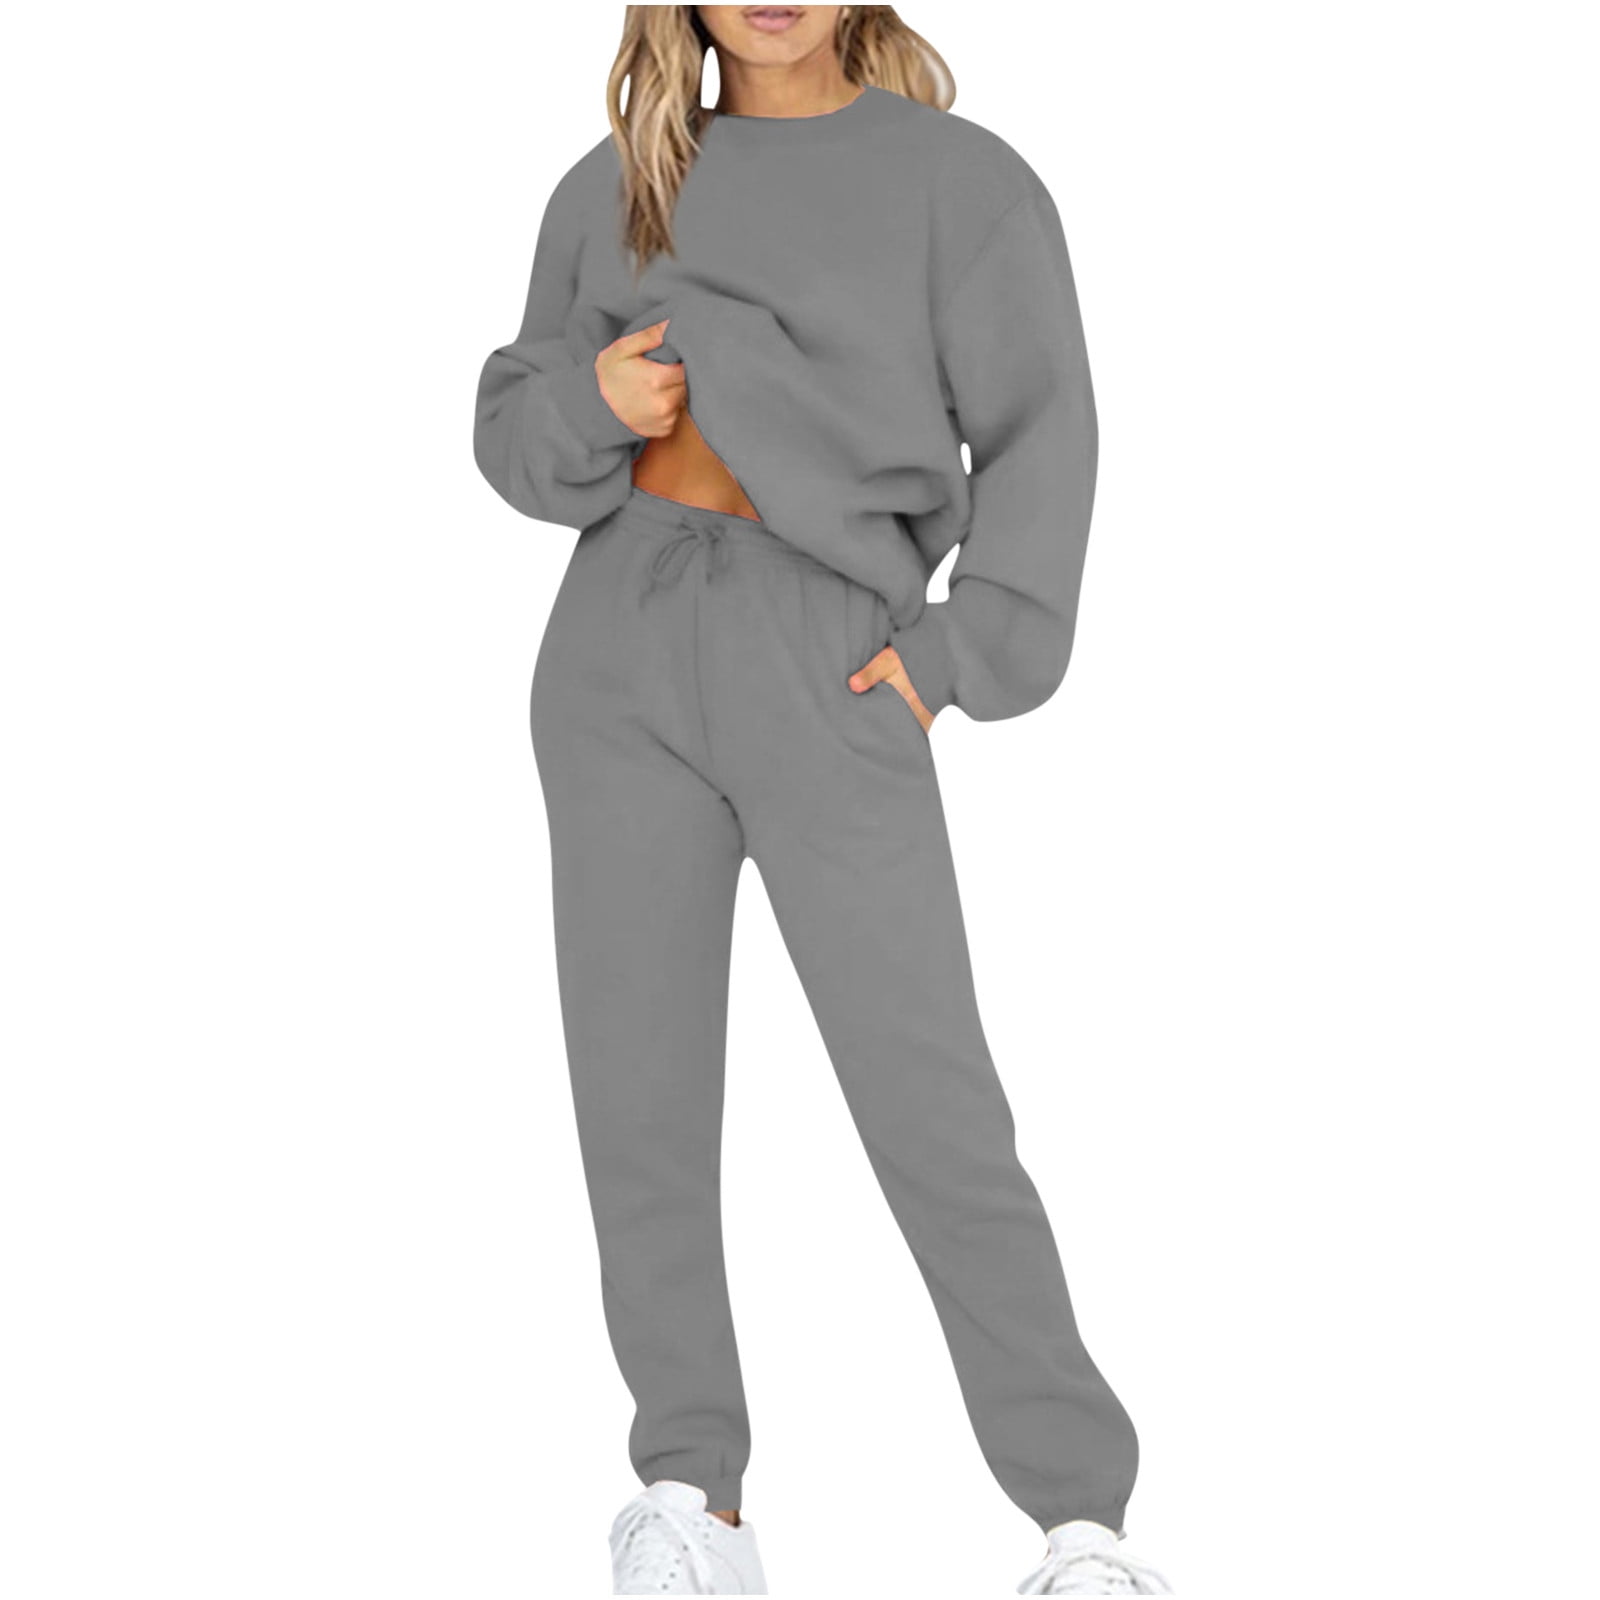 Reduced RQYYD Women Hoodies Tracksuit Long Sleeve Sweatshirts Jogger Pants  Sweatpants Jogging Suits 2 Piece Outfits Casual Hooded Lounge Sets(Pink,M)